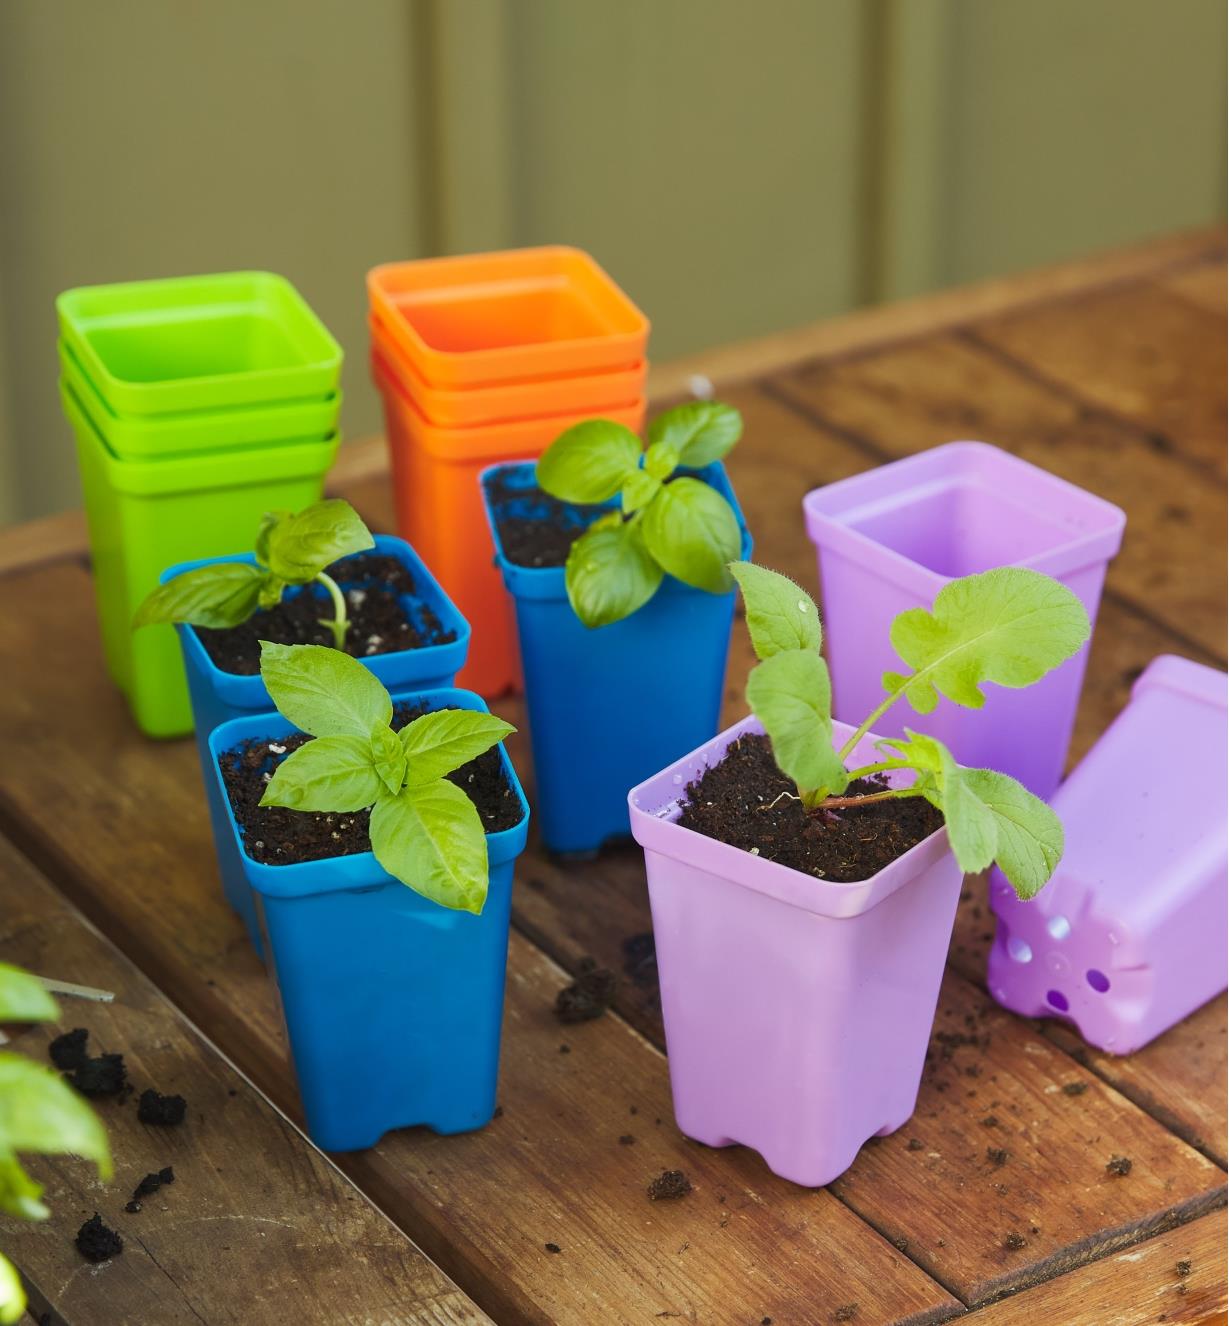 Differently colored seed starting pots with seedlings growing in them